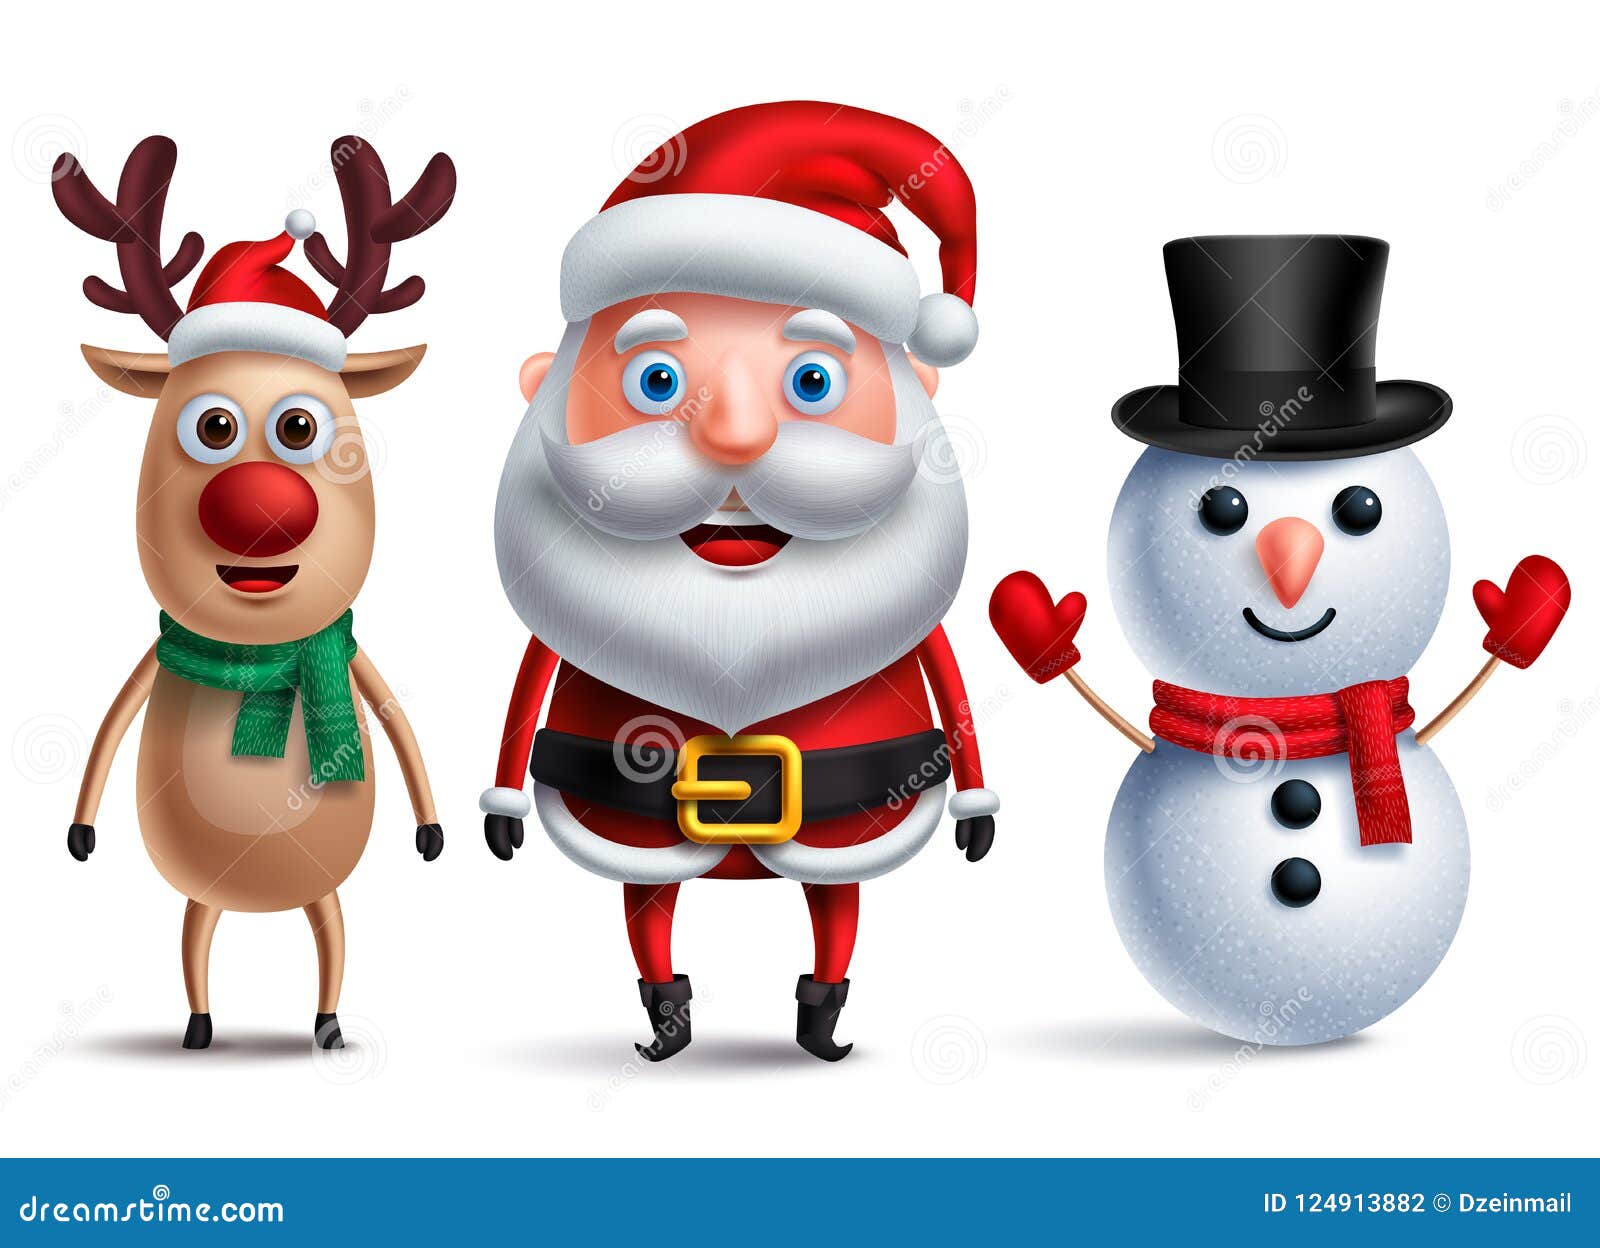 santa claus  character with snowman and rudolph the reindeer